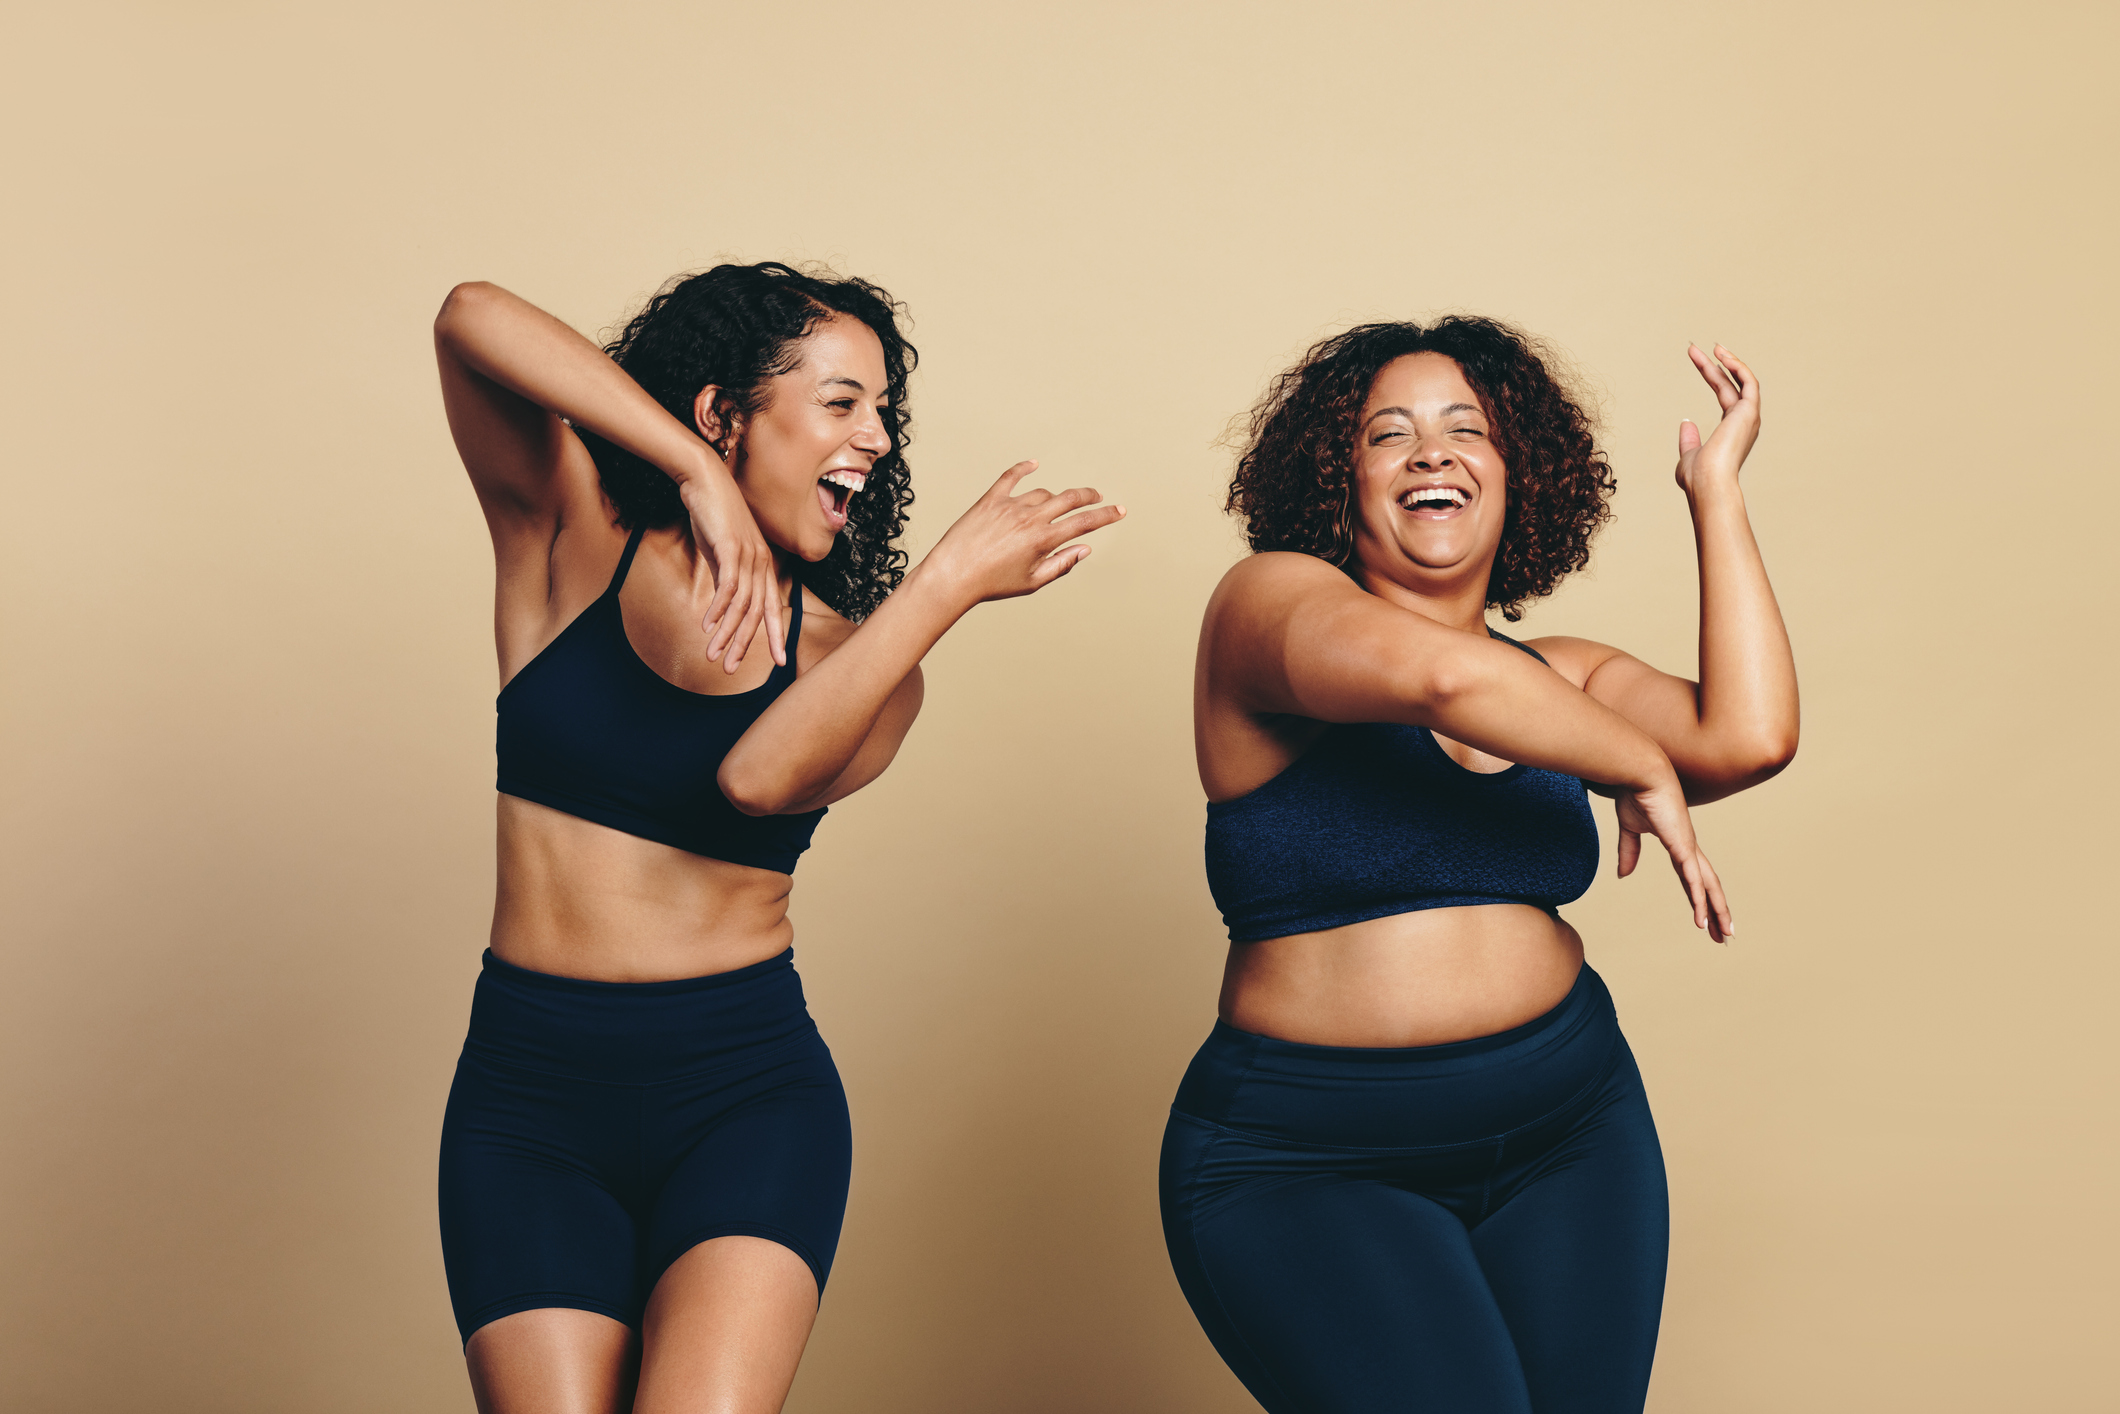 Two young women, wearing sports clothing and full of vitality, dance and exercise together in a studio. Happy female athletes having fun and celebrating their fit lifestyle.